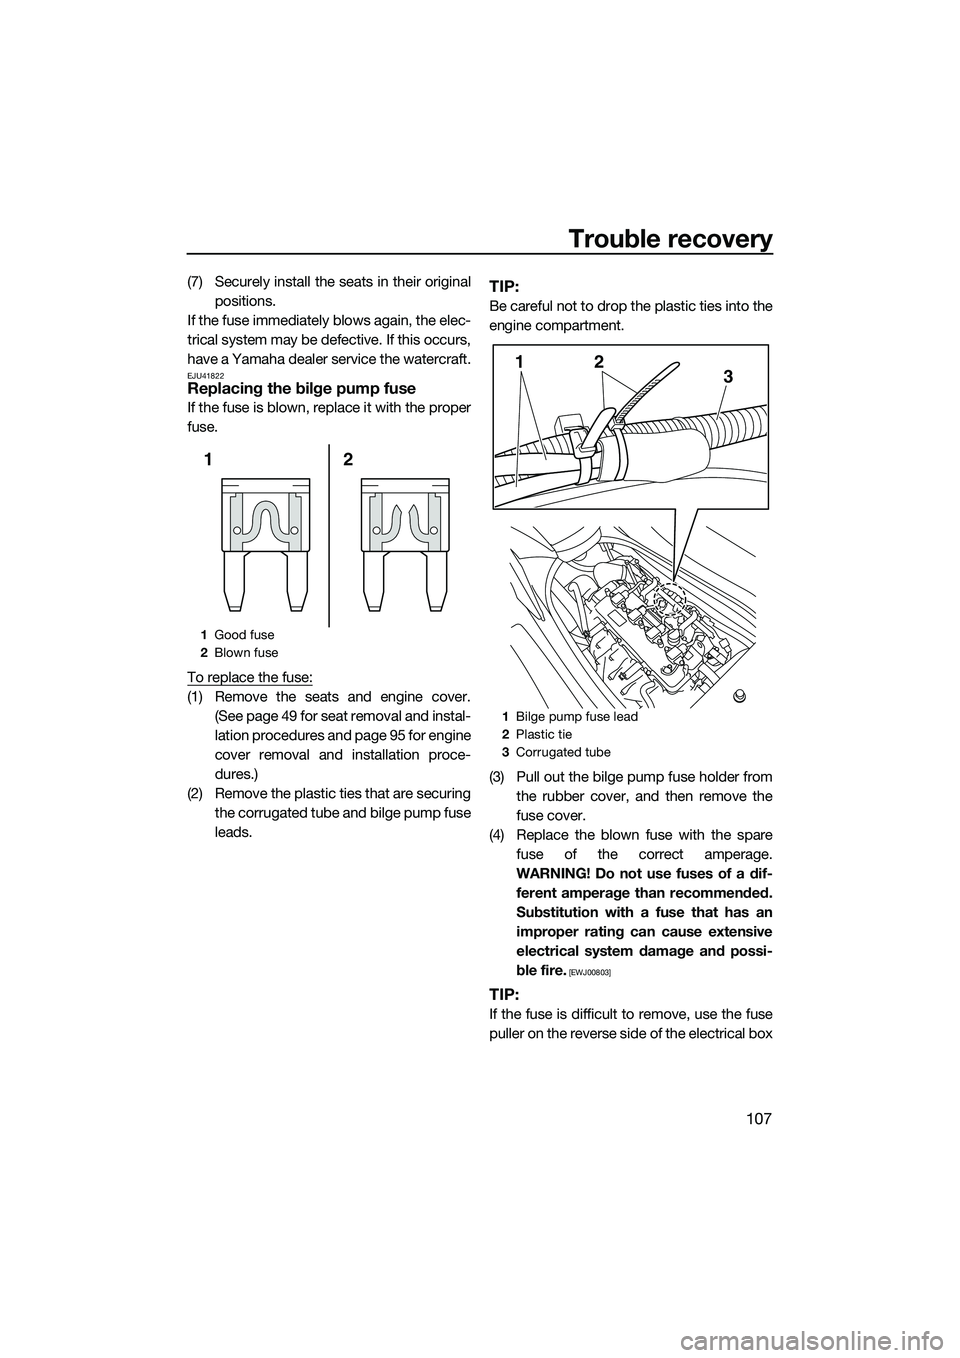 YAMAHA FX SVHO 2014  Owners Manual Trouble recovery
107
(7) Securely install the seats in their originalpositions.
If the fuse immediately blows again, the elec-
trical system may be defective. If this occurs,
have a Yamaha dealer serv